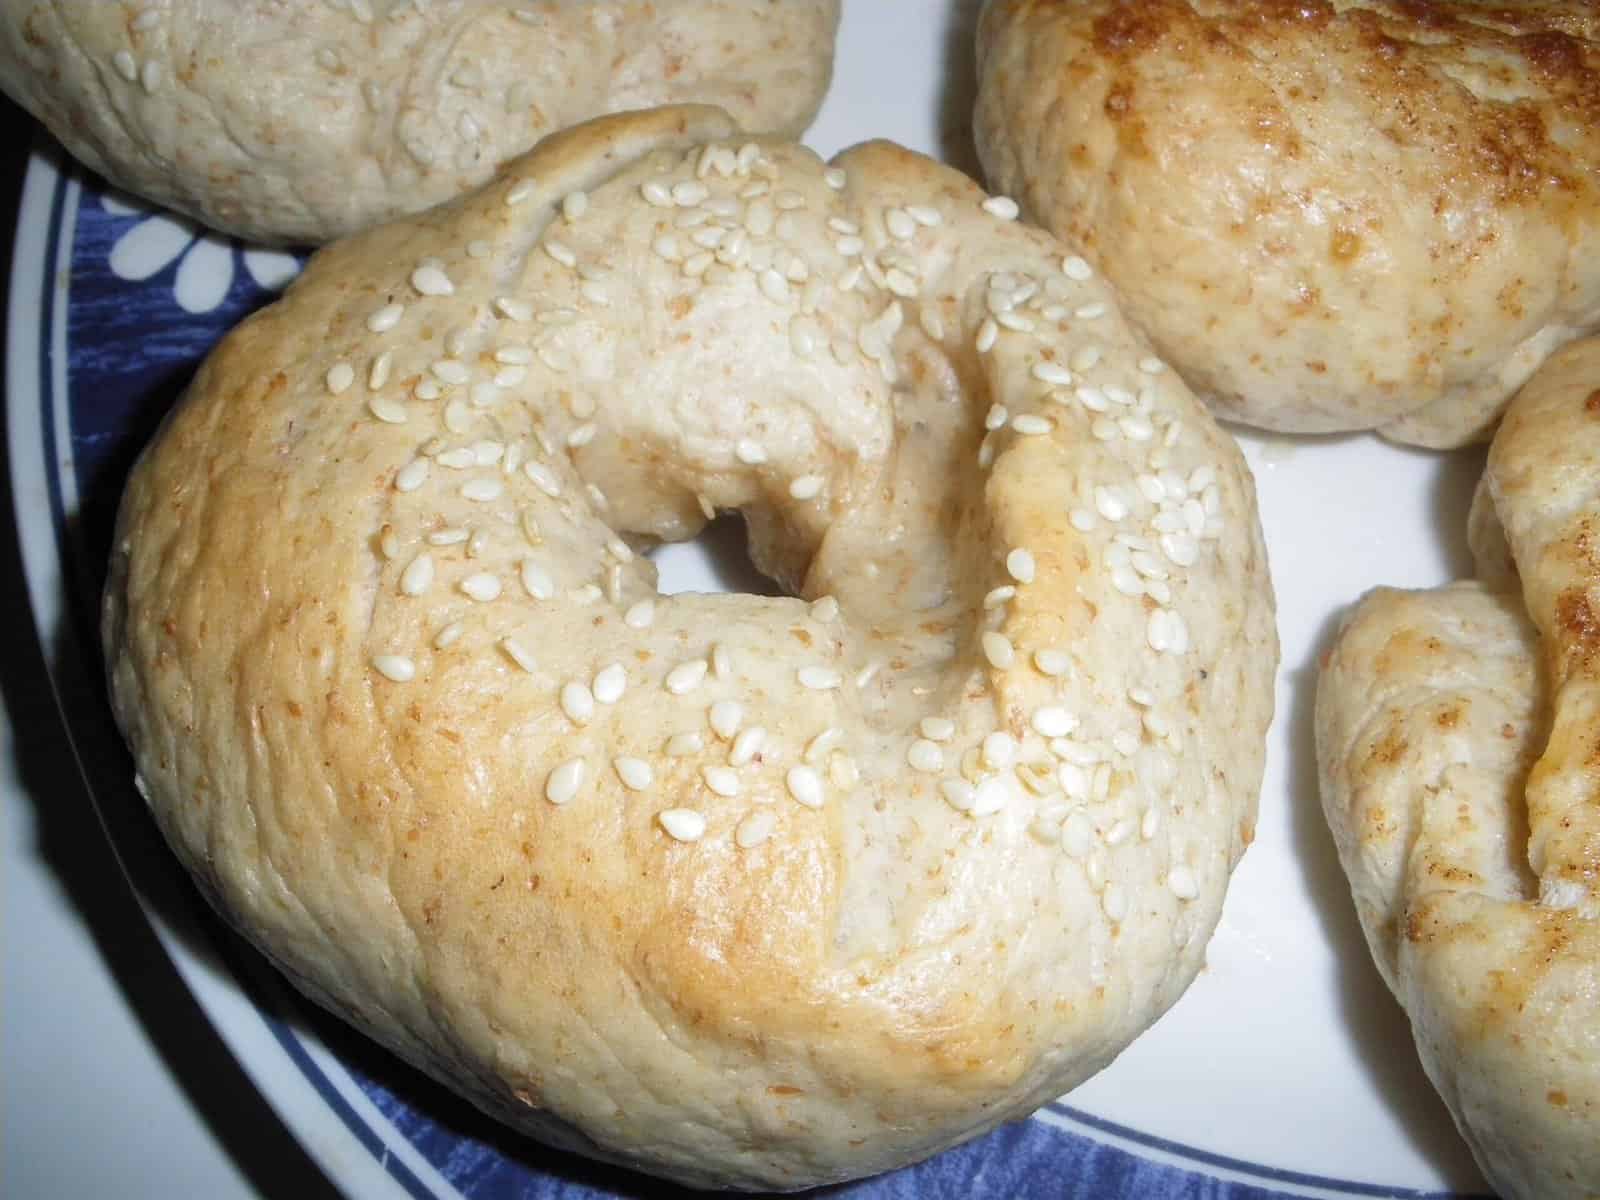  A fresh batch of homemade bagels can turn any morning into a good one.